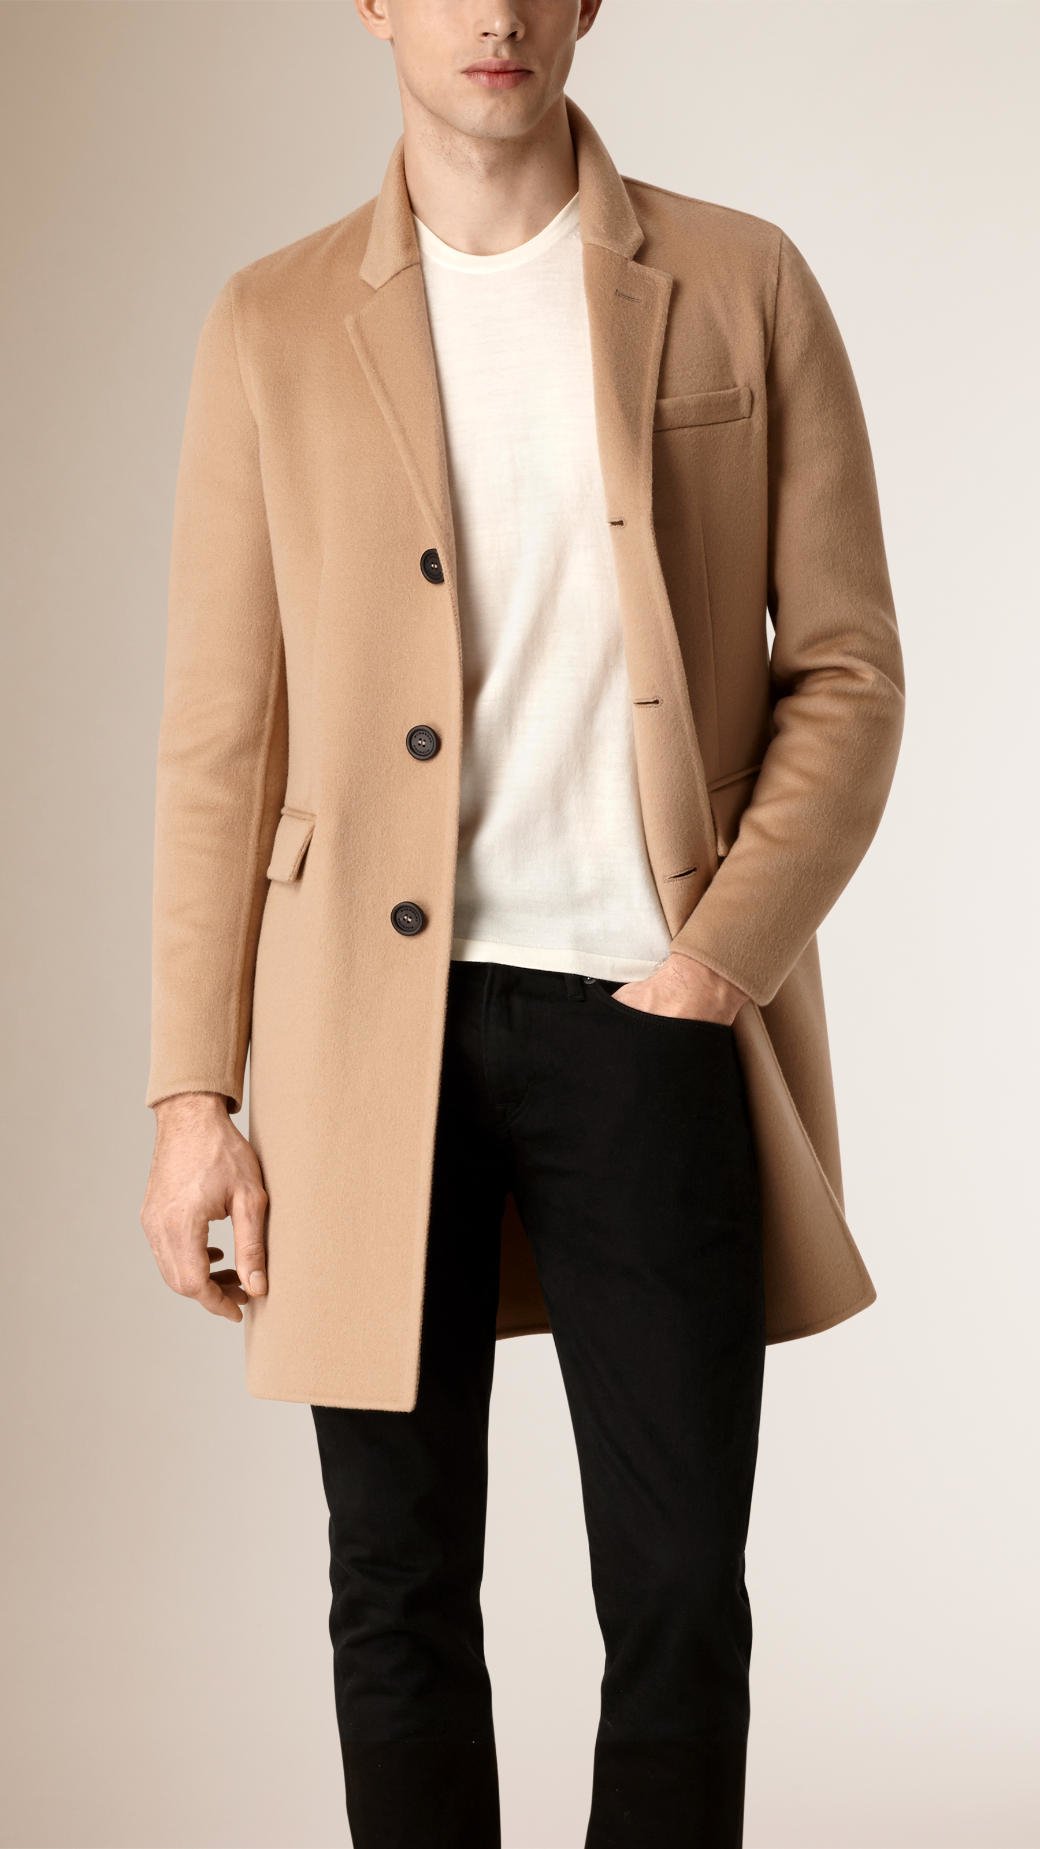 Burberry Tailored Cashmere Coat in Camel (Natural) for Men - Lyst